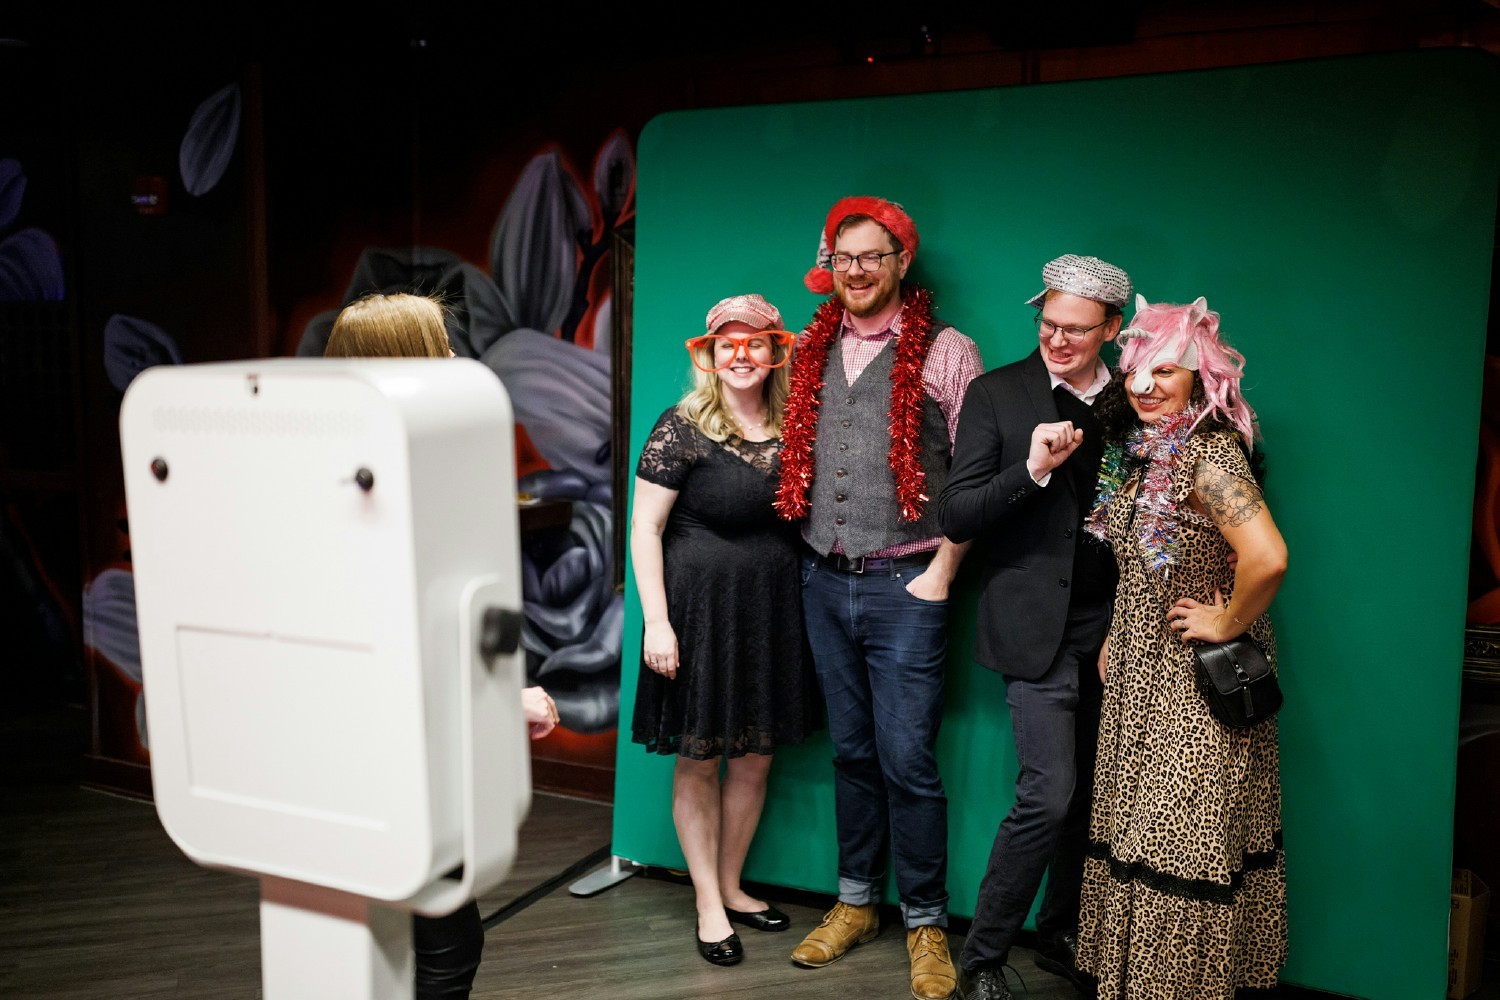 Photo booth fun from our annual company kick off party in Seattle - January 2022.